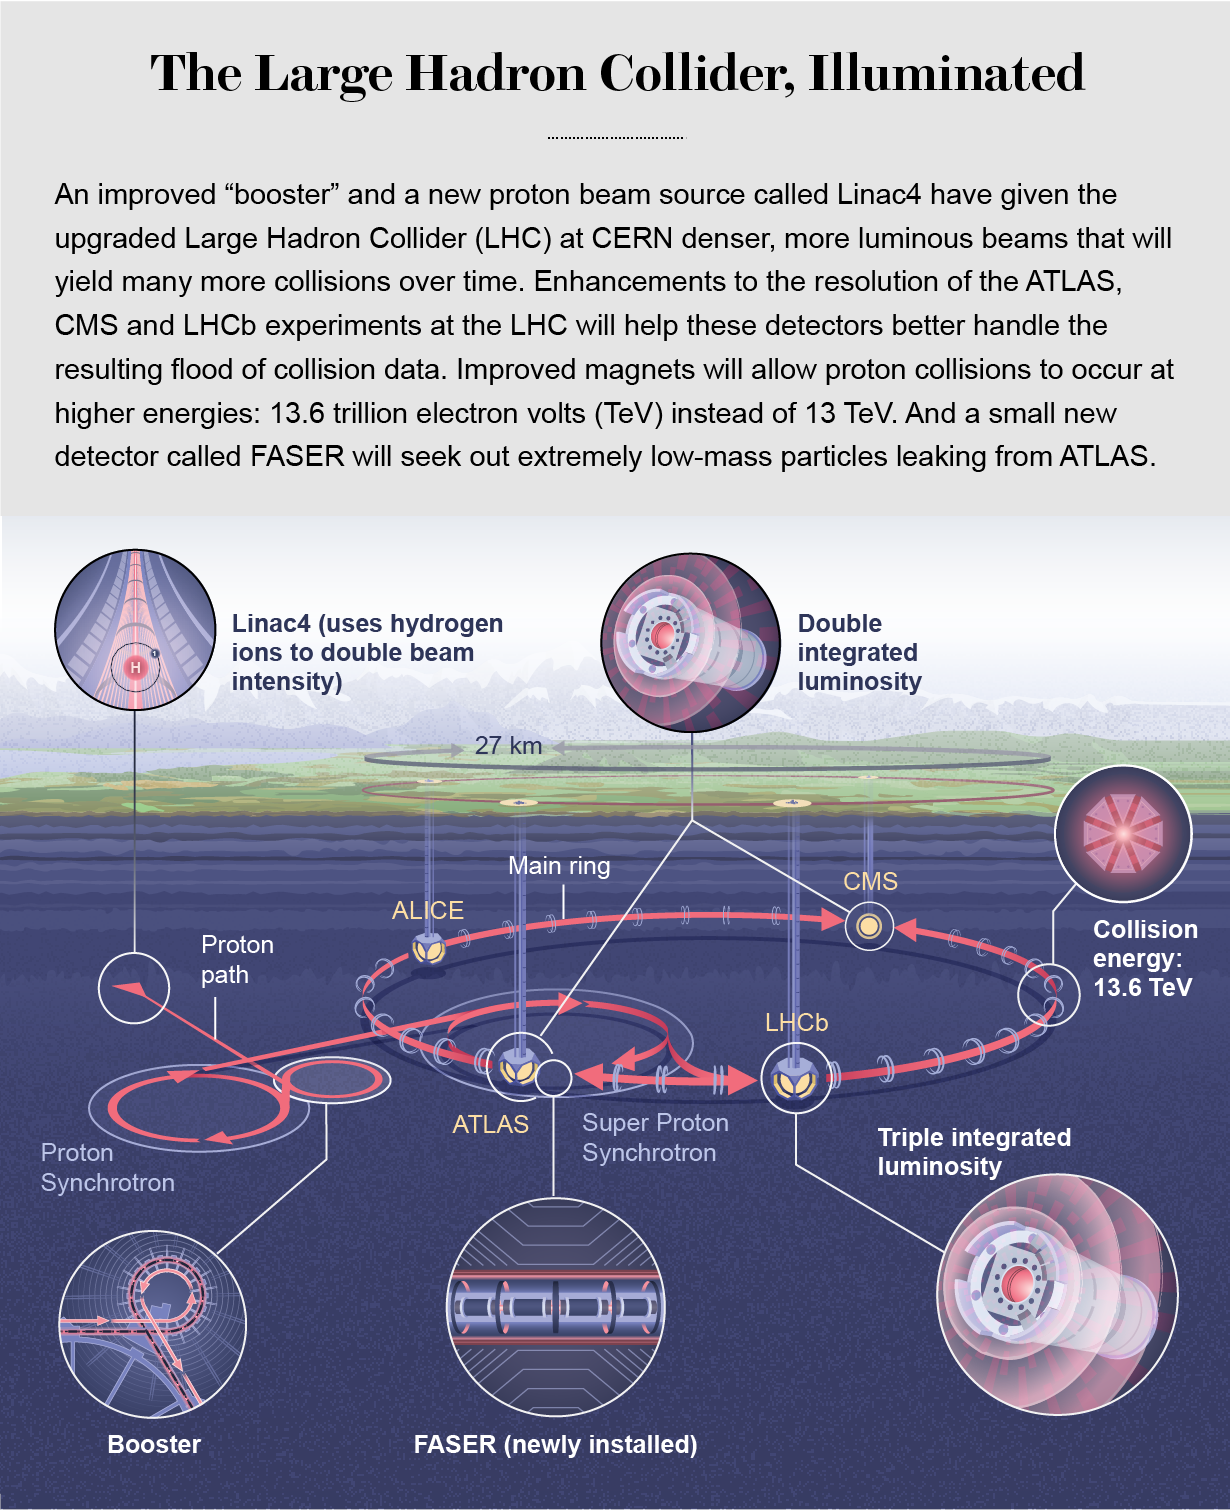 Graphic shows the Large Hadron Collider in its underground setting and highlights six major upgrades recently incorporated.